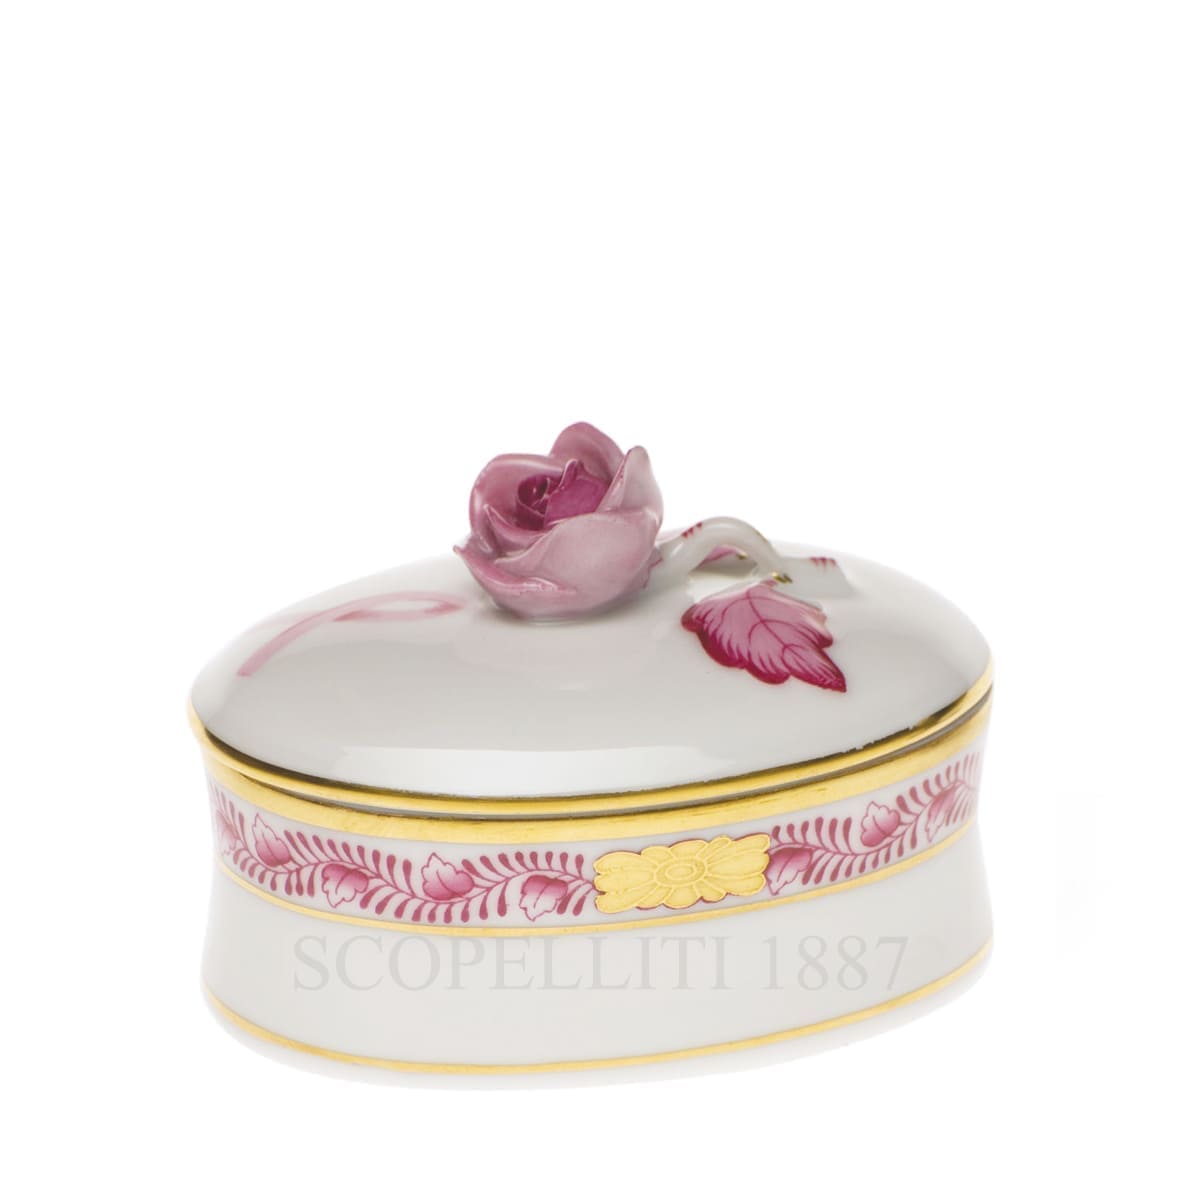 herend handpainted porcelain bonbonniere with rose pink